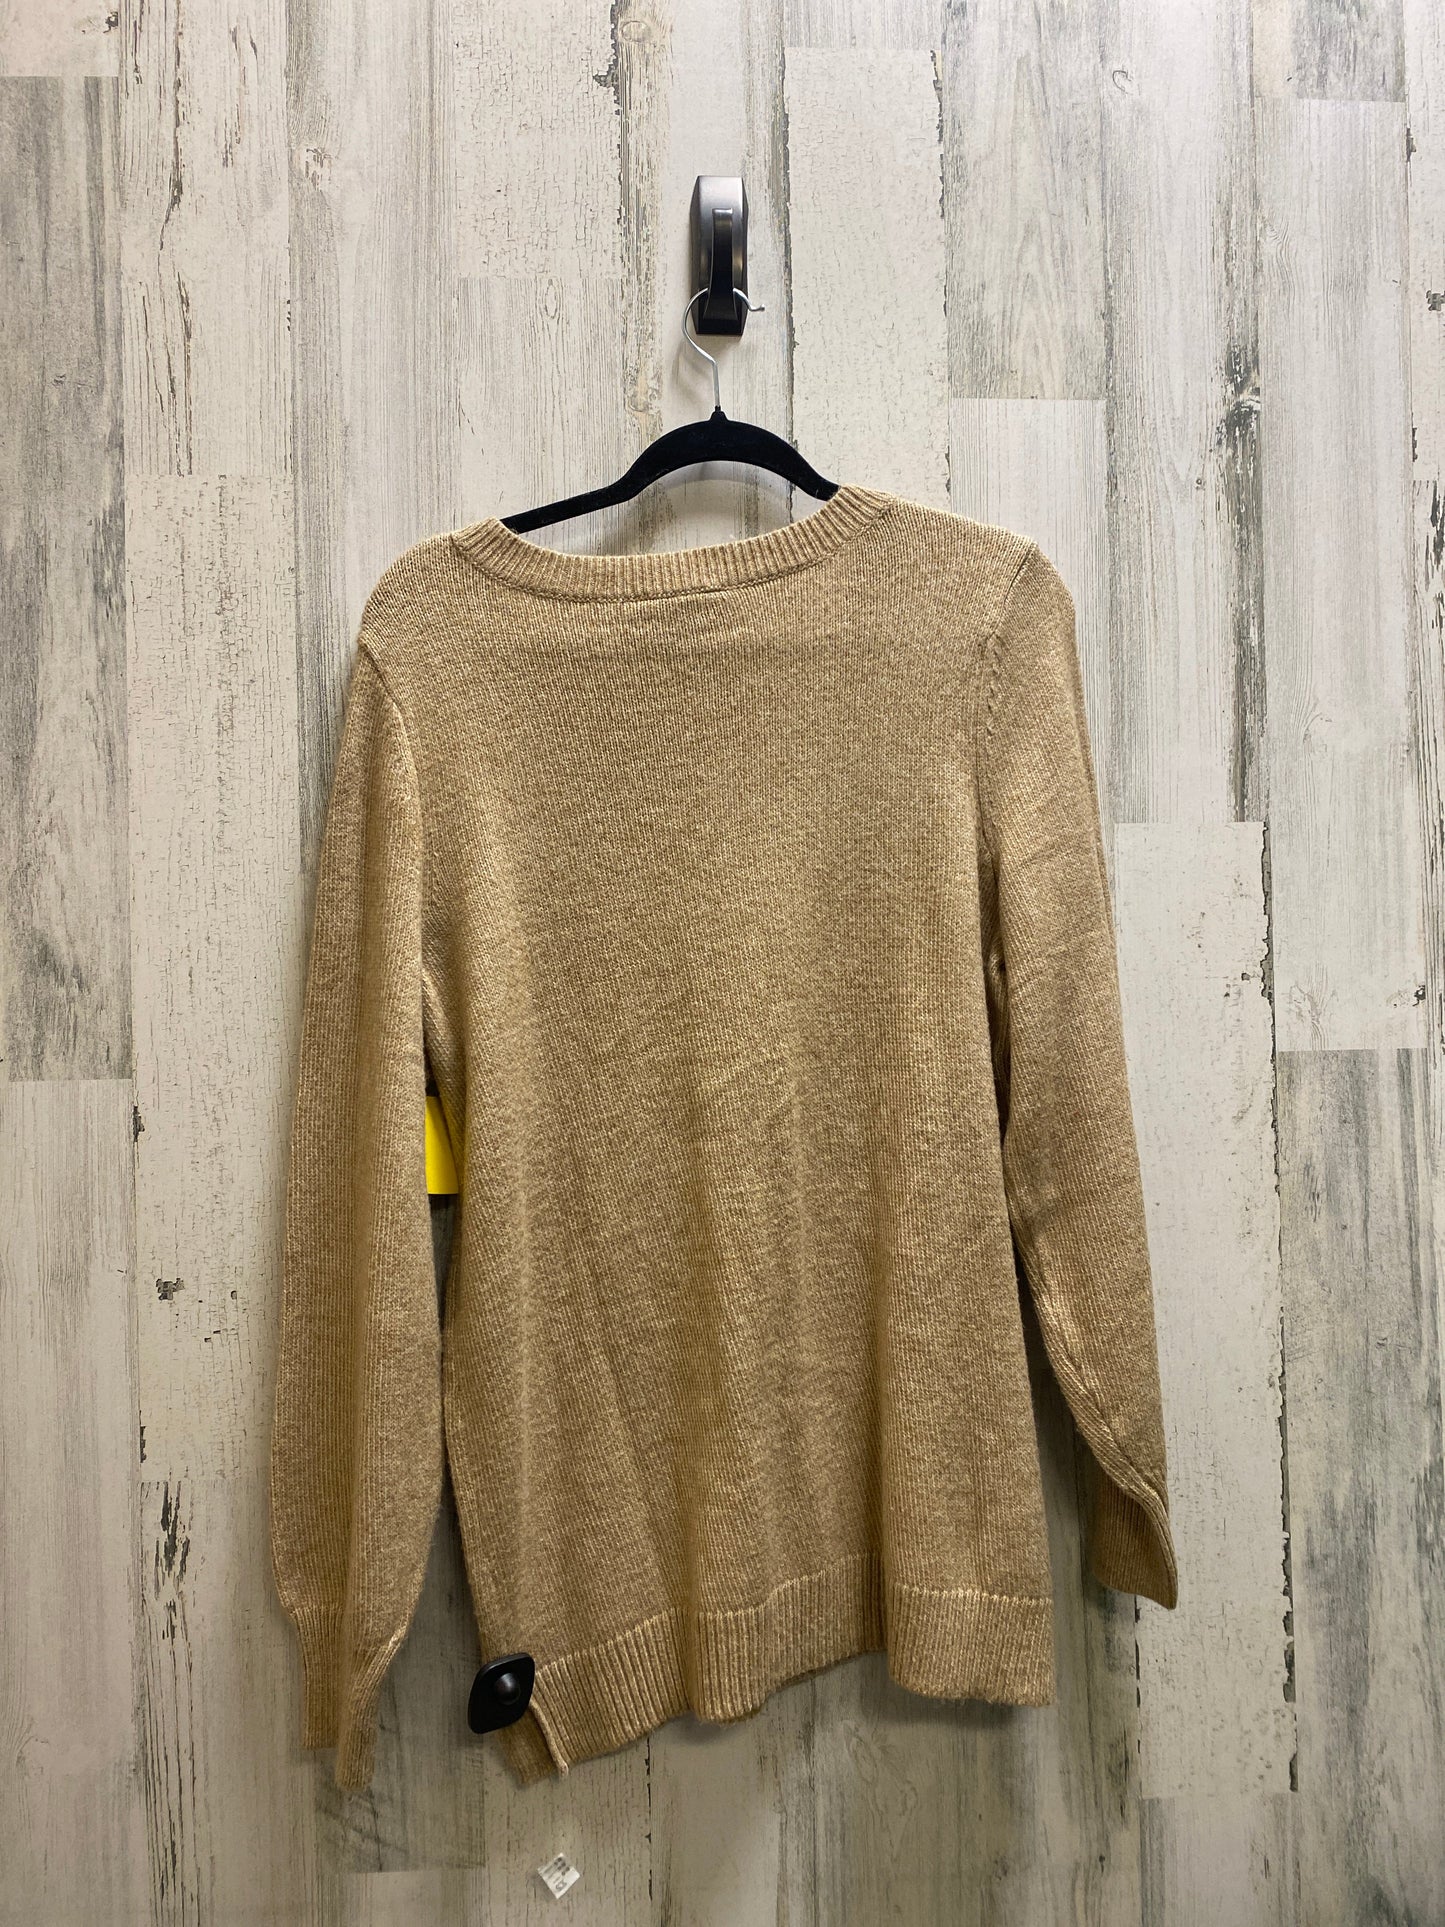 Sweater By Lane Bryant  Size: M